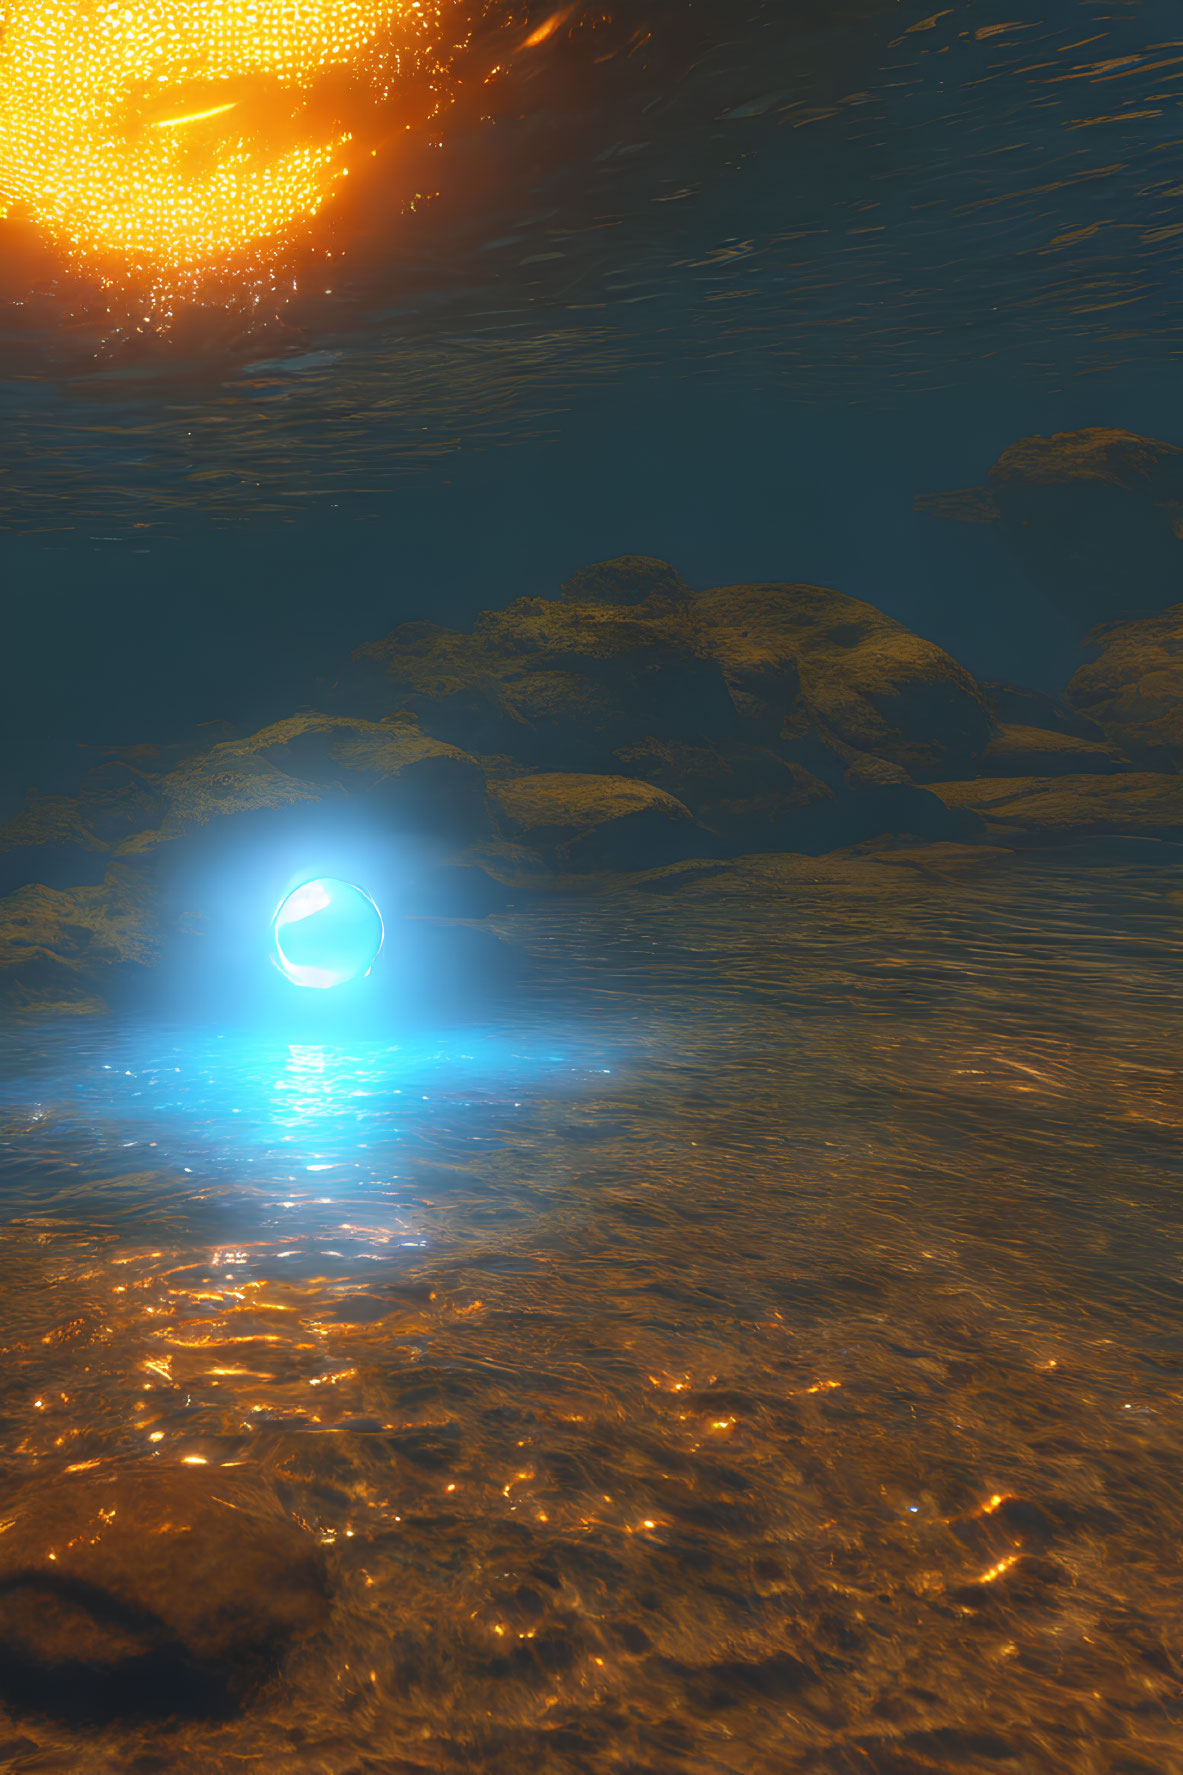 Glowing blue object in underwater scene with rocks and golden sparkles